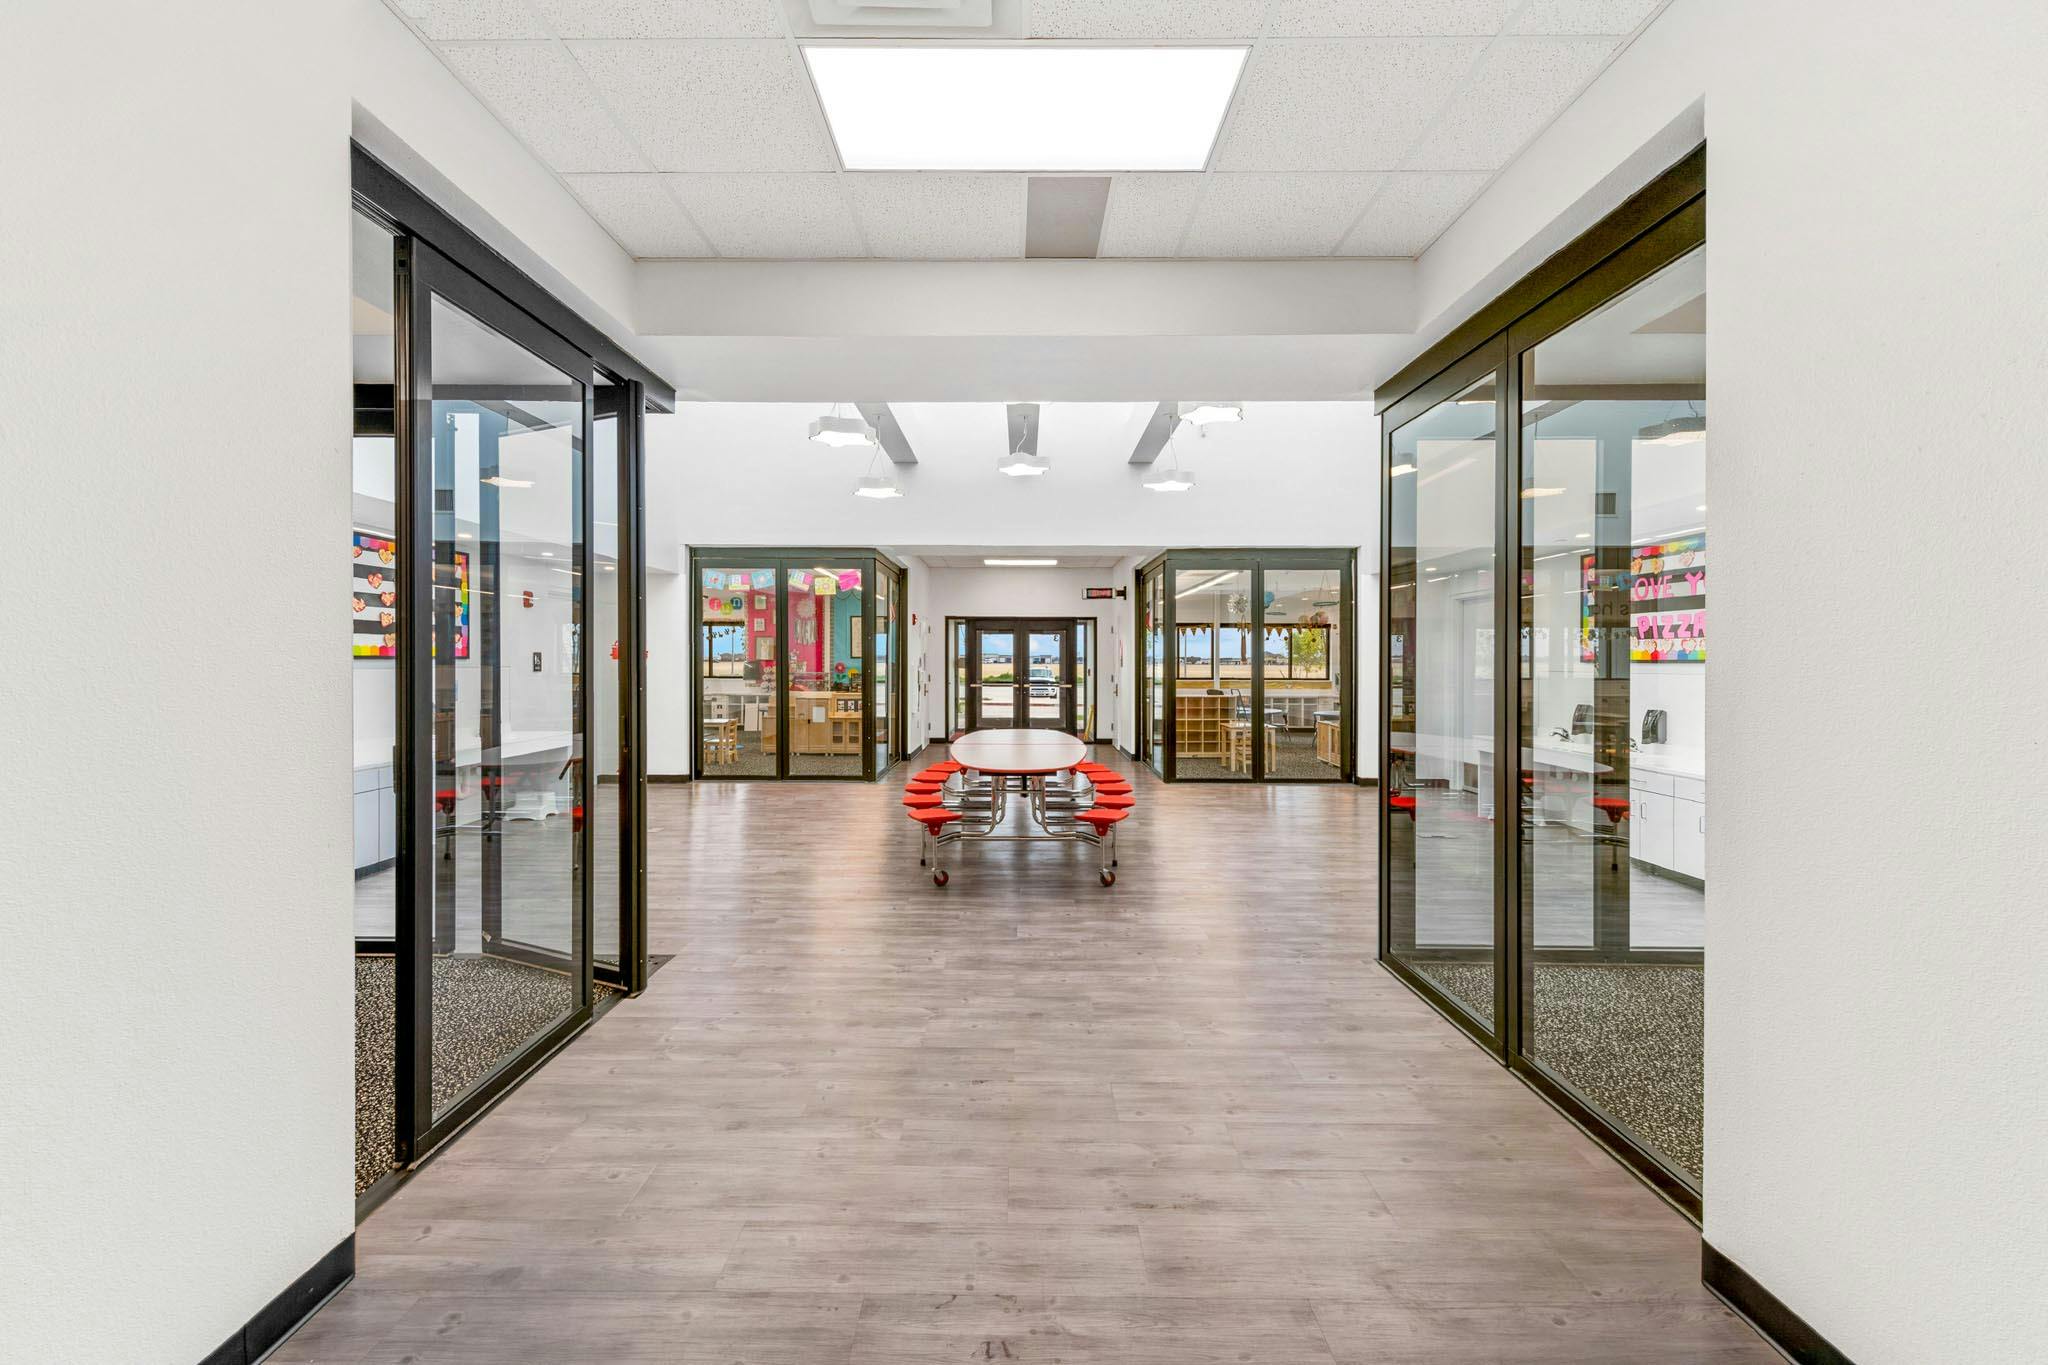 learning hub design in schools with NanaWall sliding glass walls